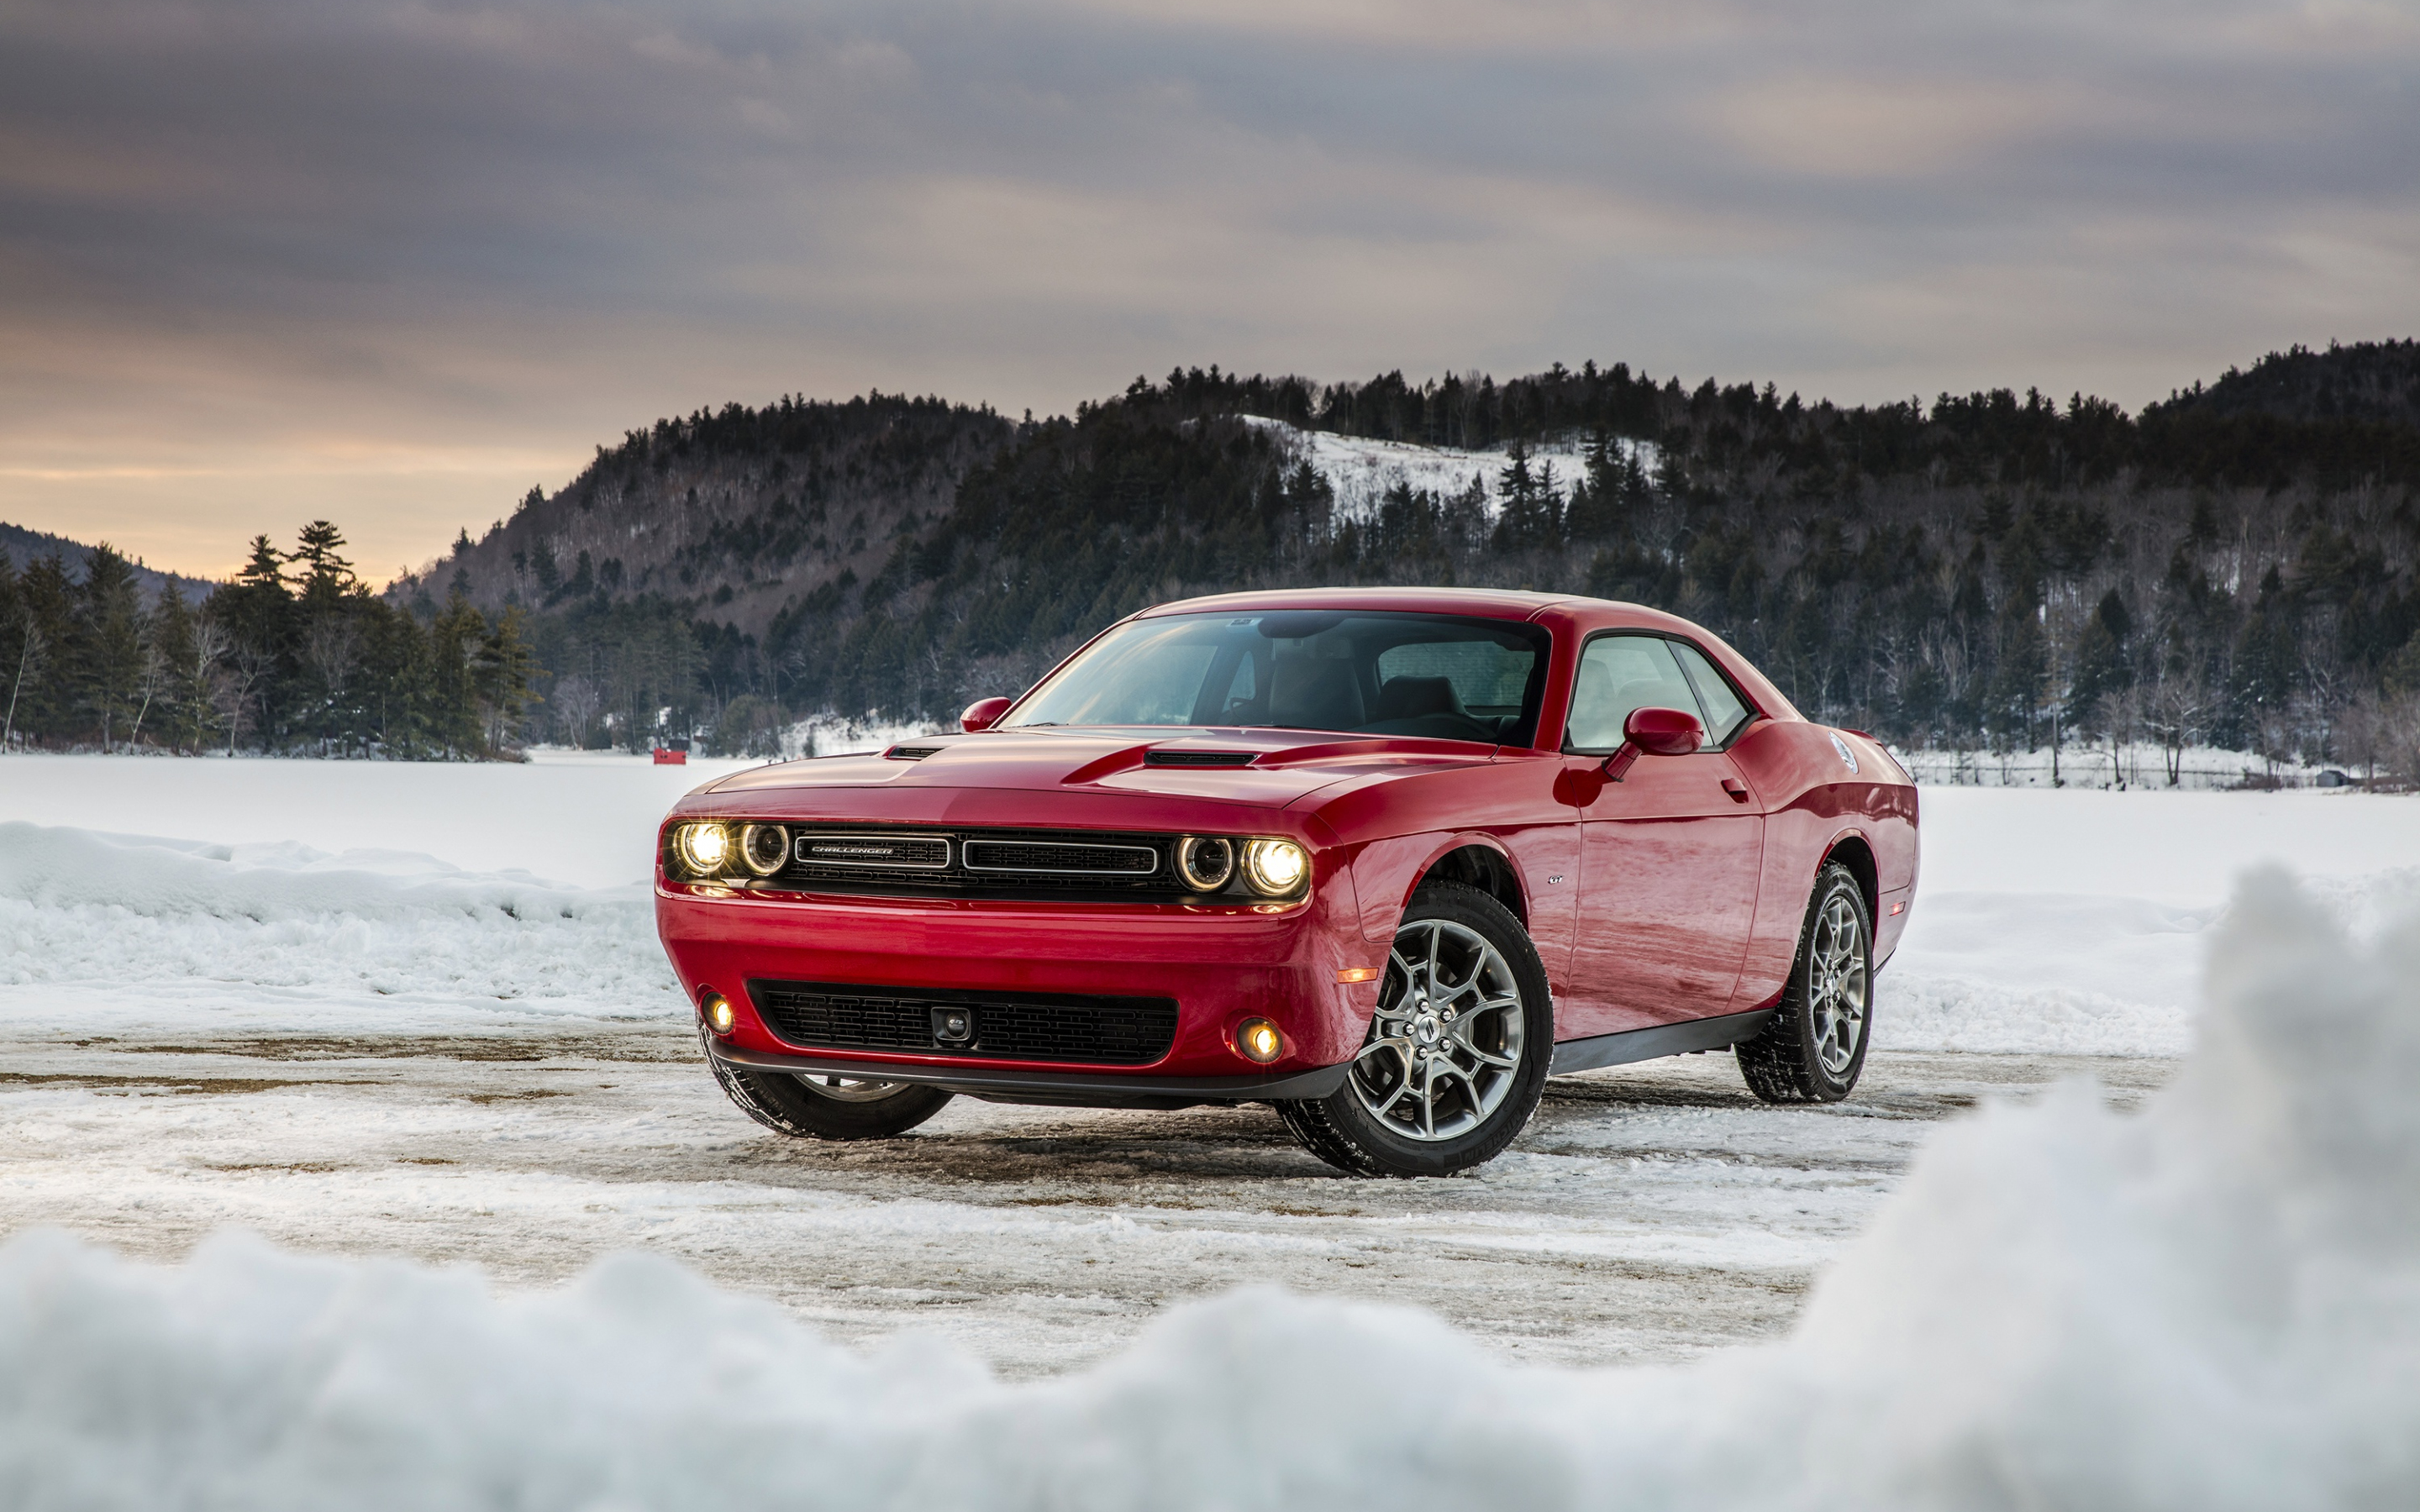 Dodge challenger, red muscle car, 2880x1800 wallpaper